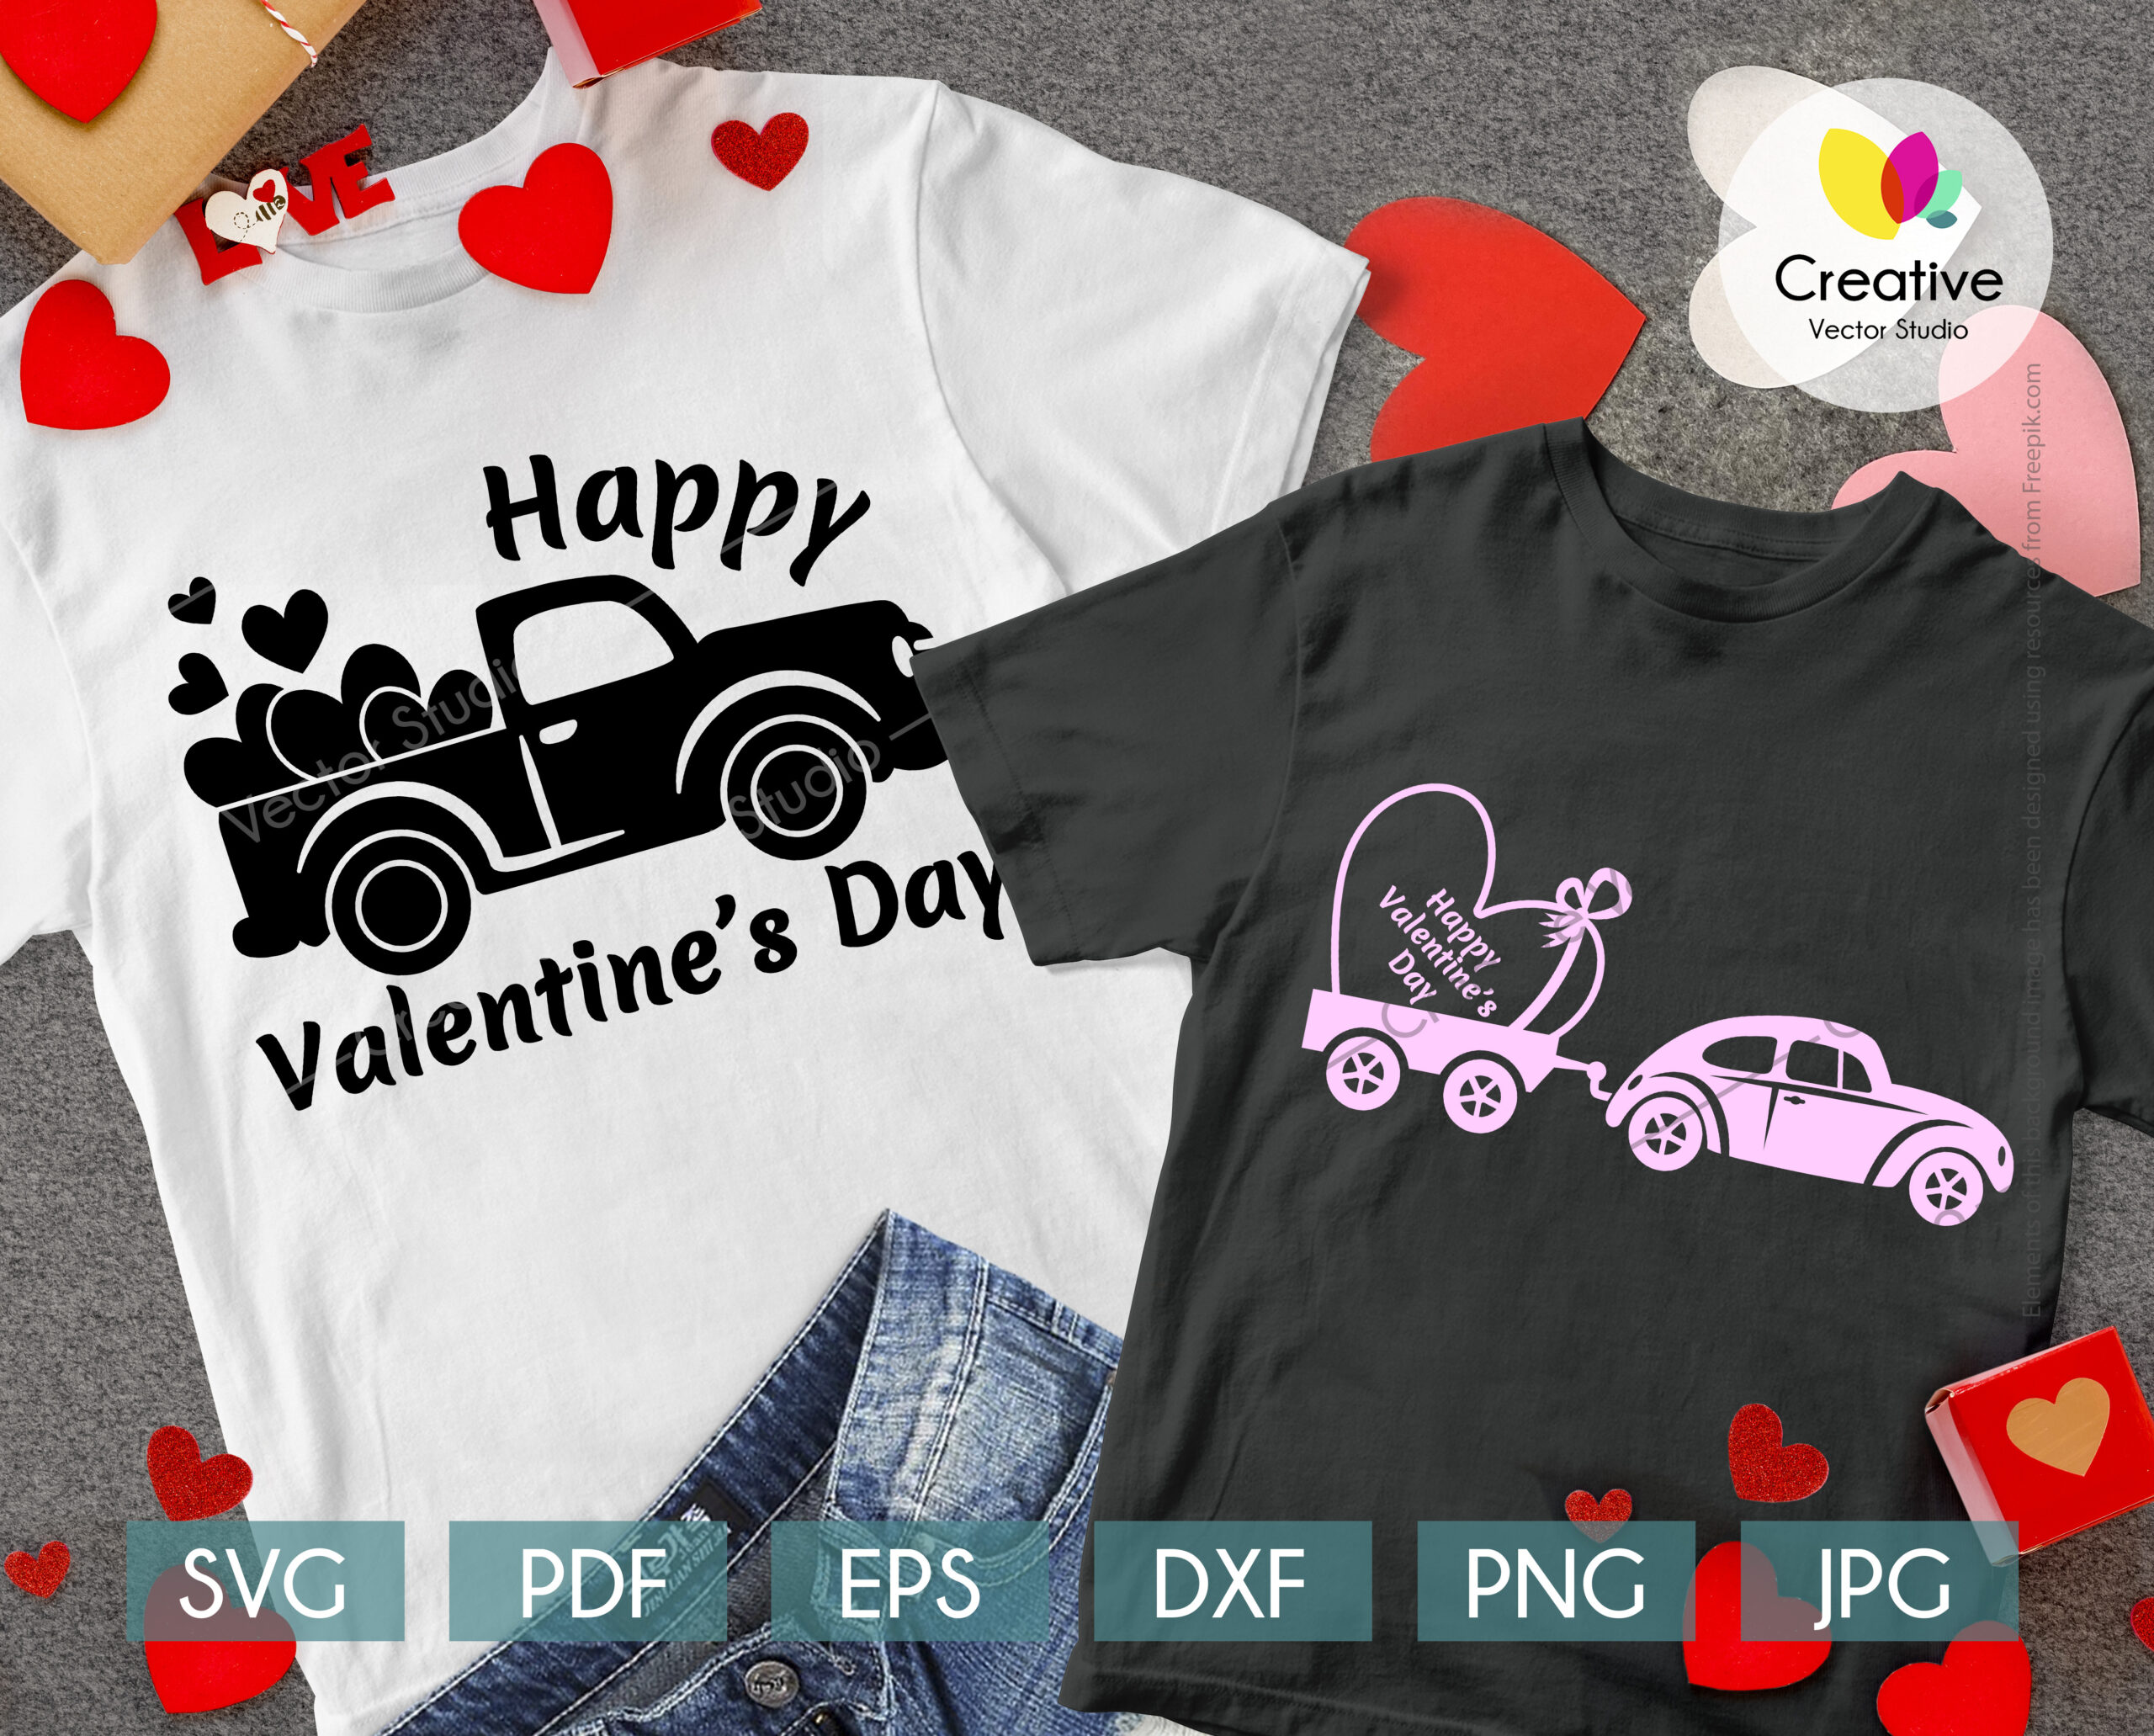 Valentines Day Ribbon Badge PNG & SVG Design For T-Shirts